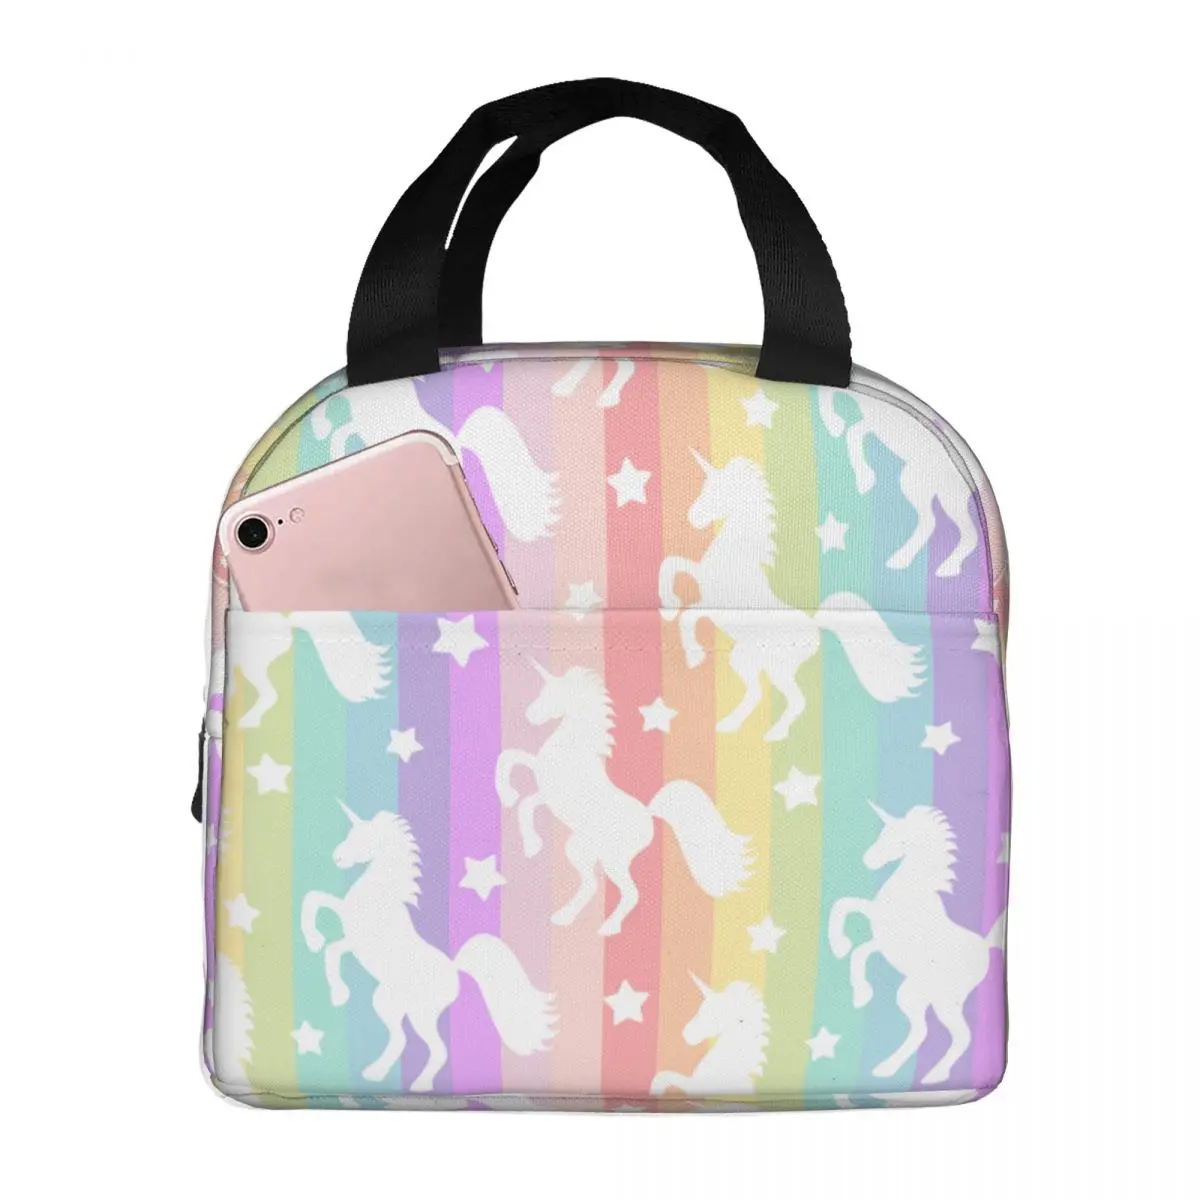 Lunch Bag for Women Kids Rainbow Unicorn Insulated Cooler Bag Waterproof Picnic Canvas Tote Food Storage Bags